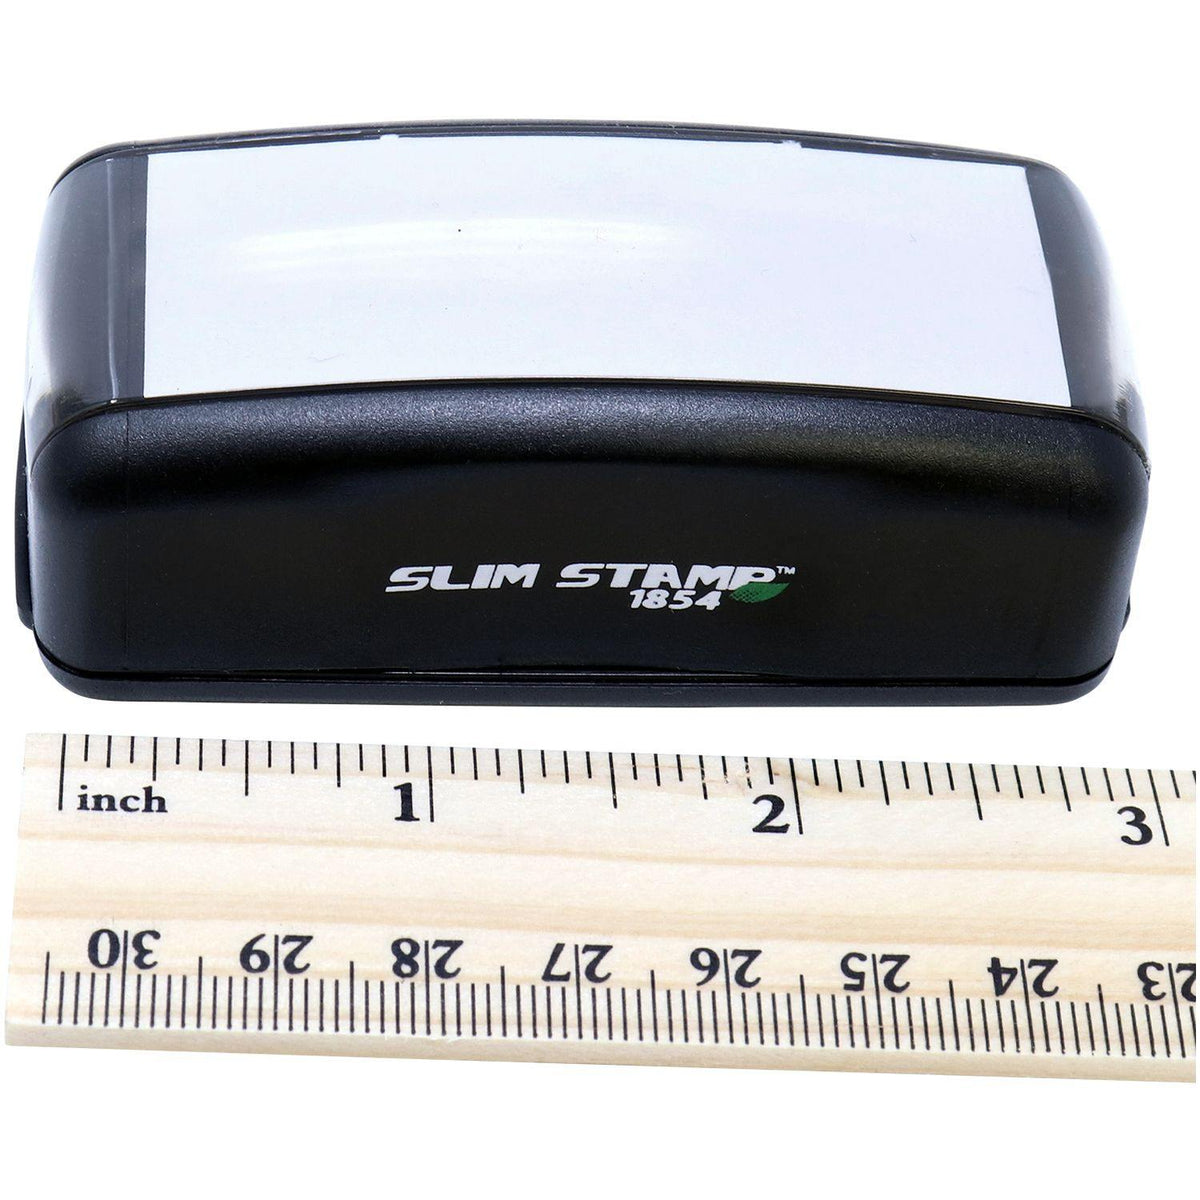 Measurement Large Pre-Inked Confirmation of Phone Order Stamp with Ruler